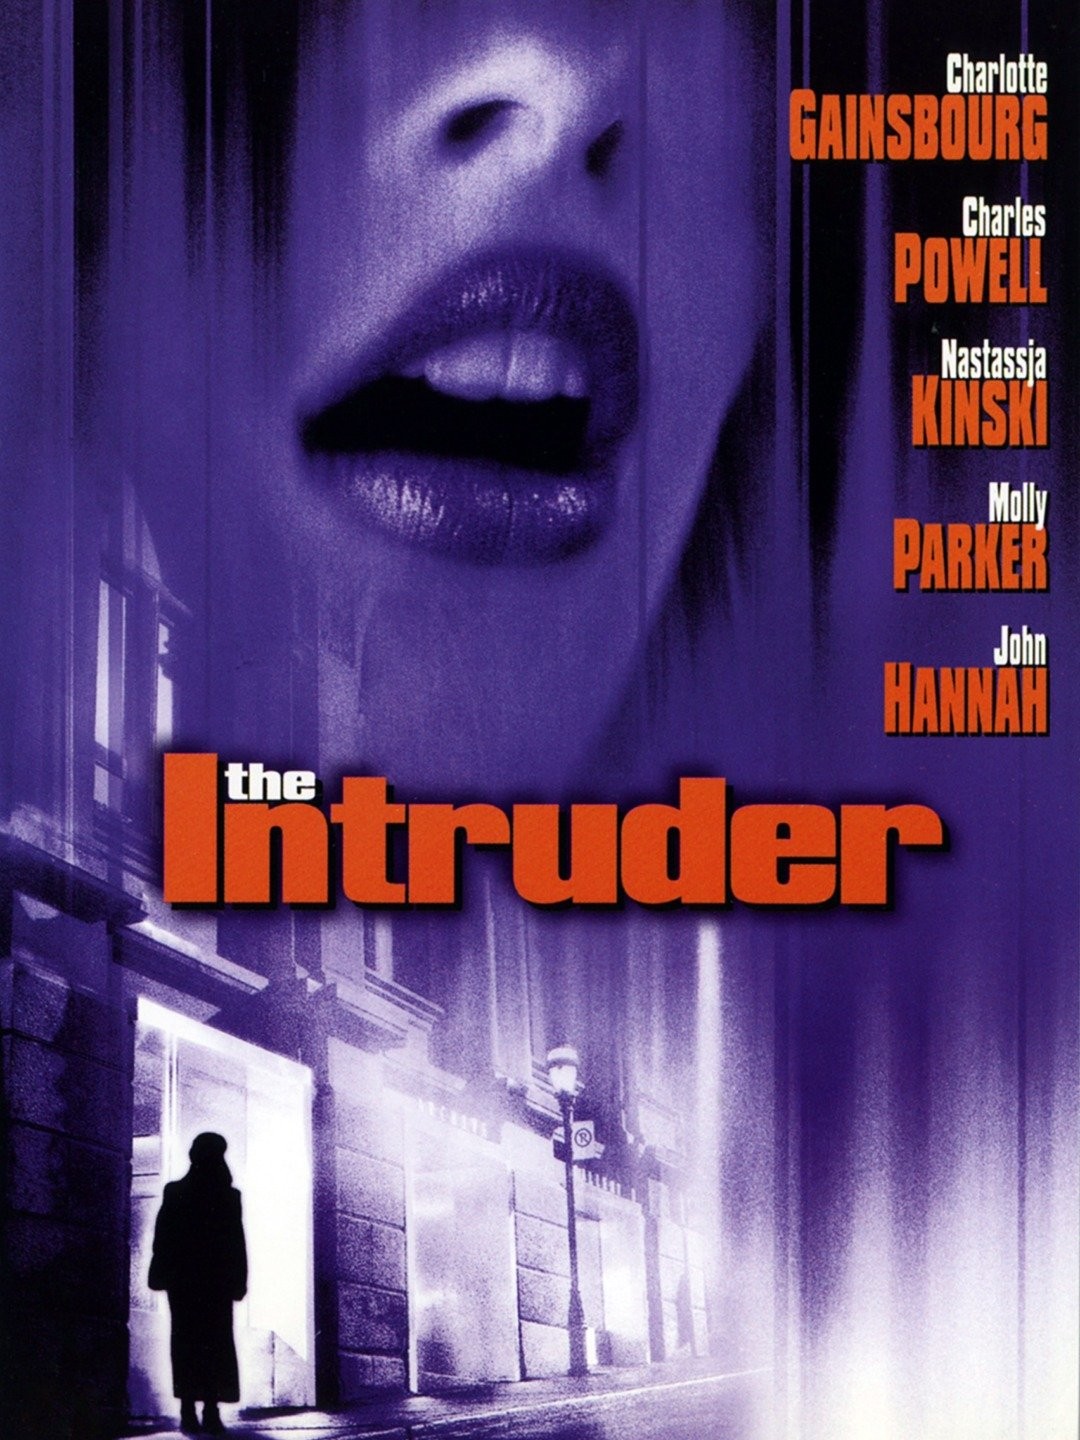 The Intruders - Rotten Tomatoes